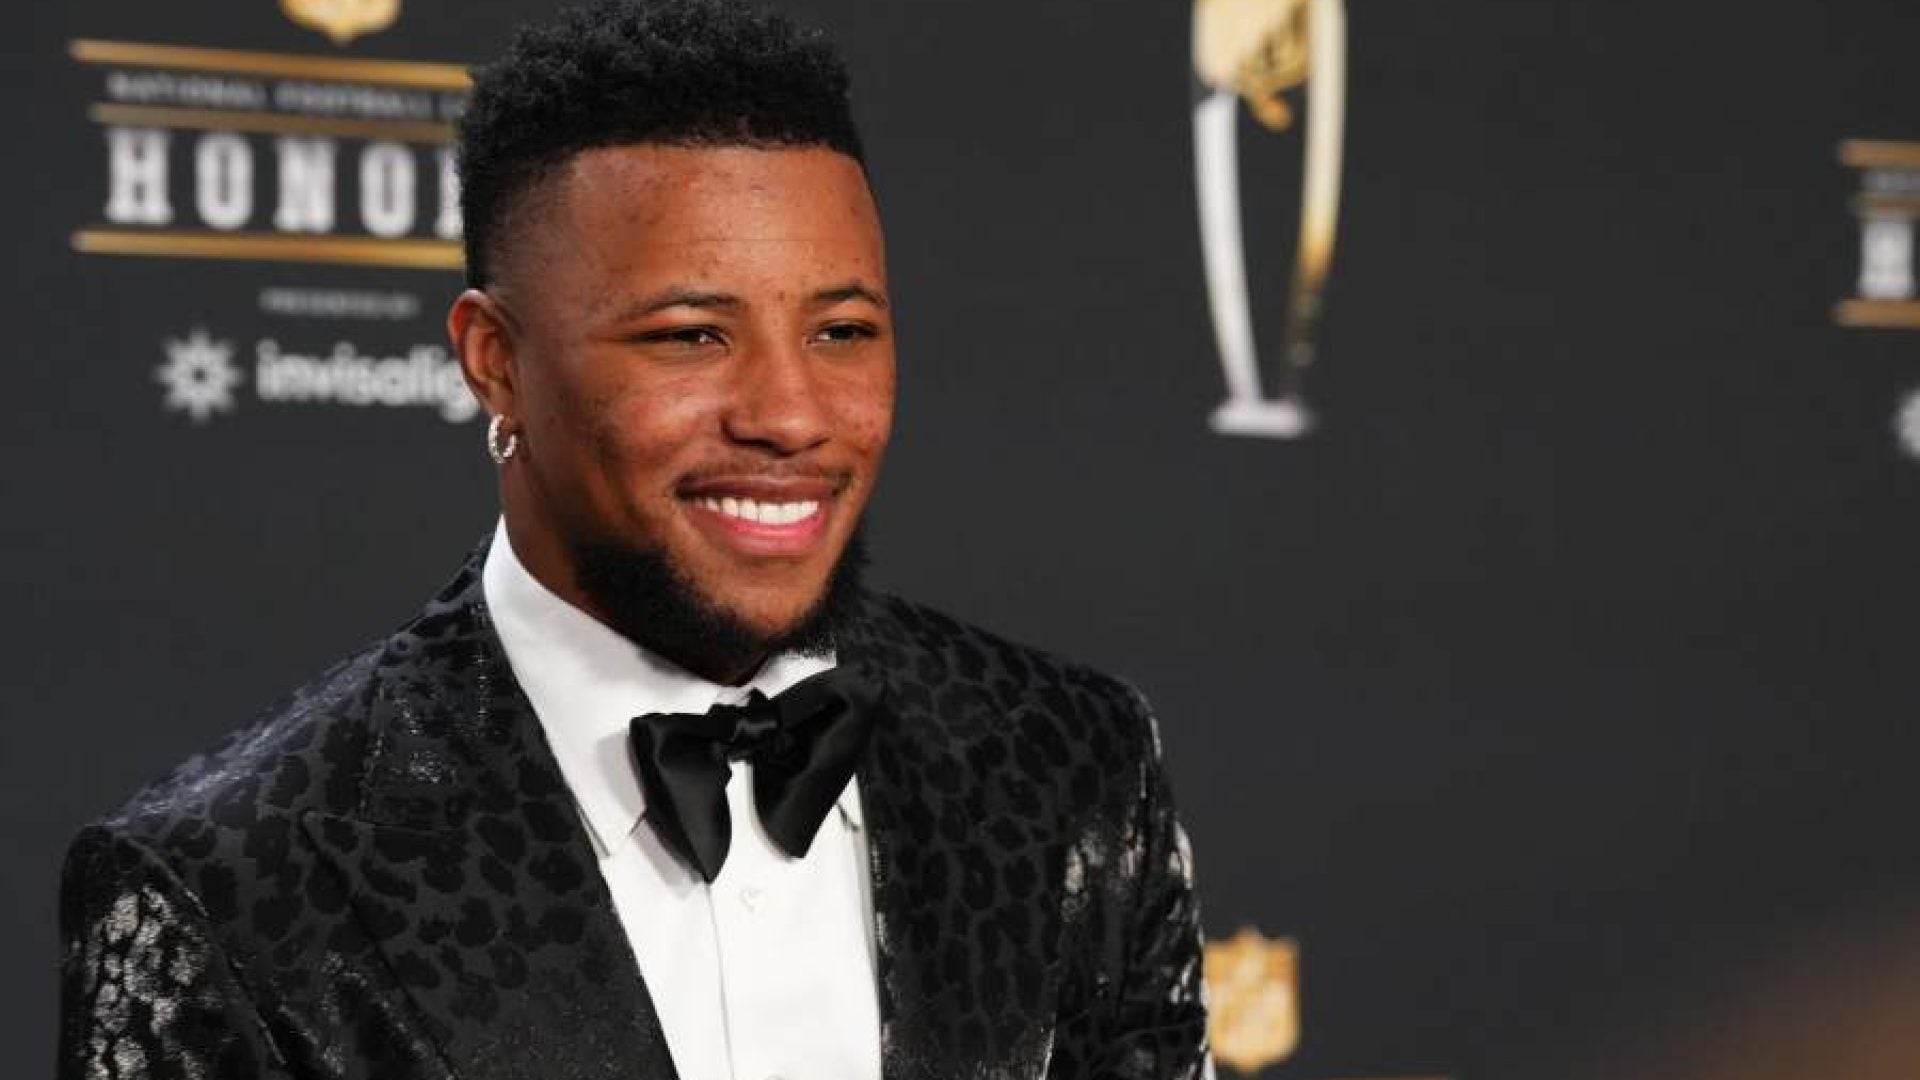 Saquon Barkley On The Importance Of Health In His Life And Career